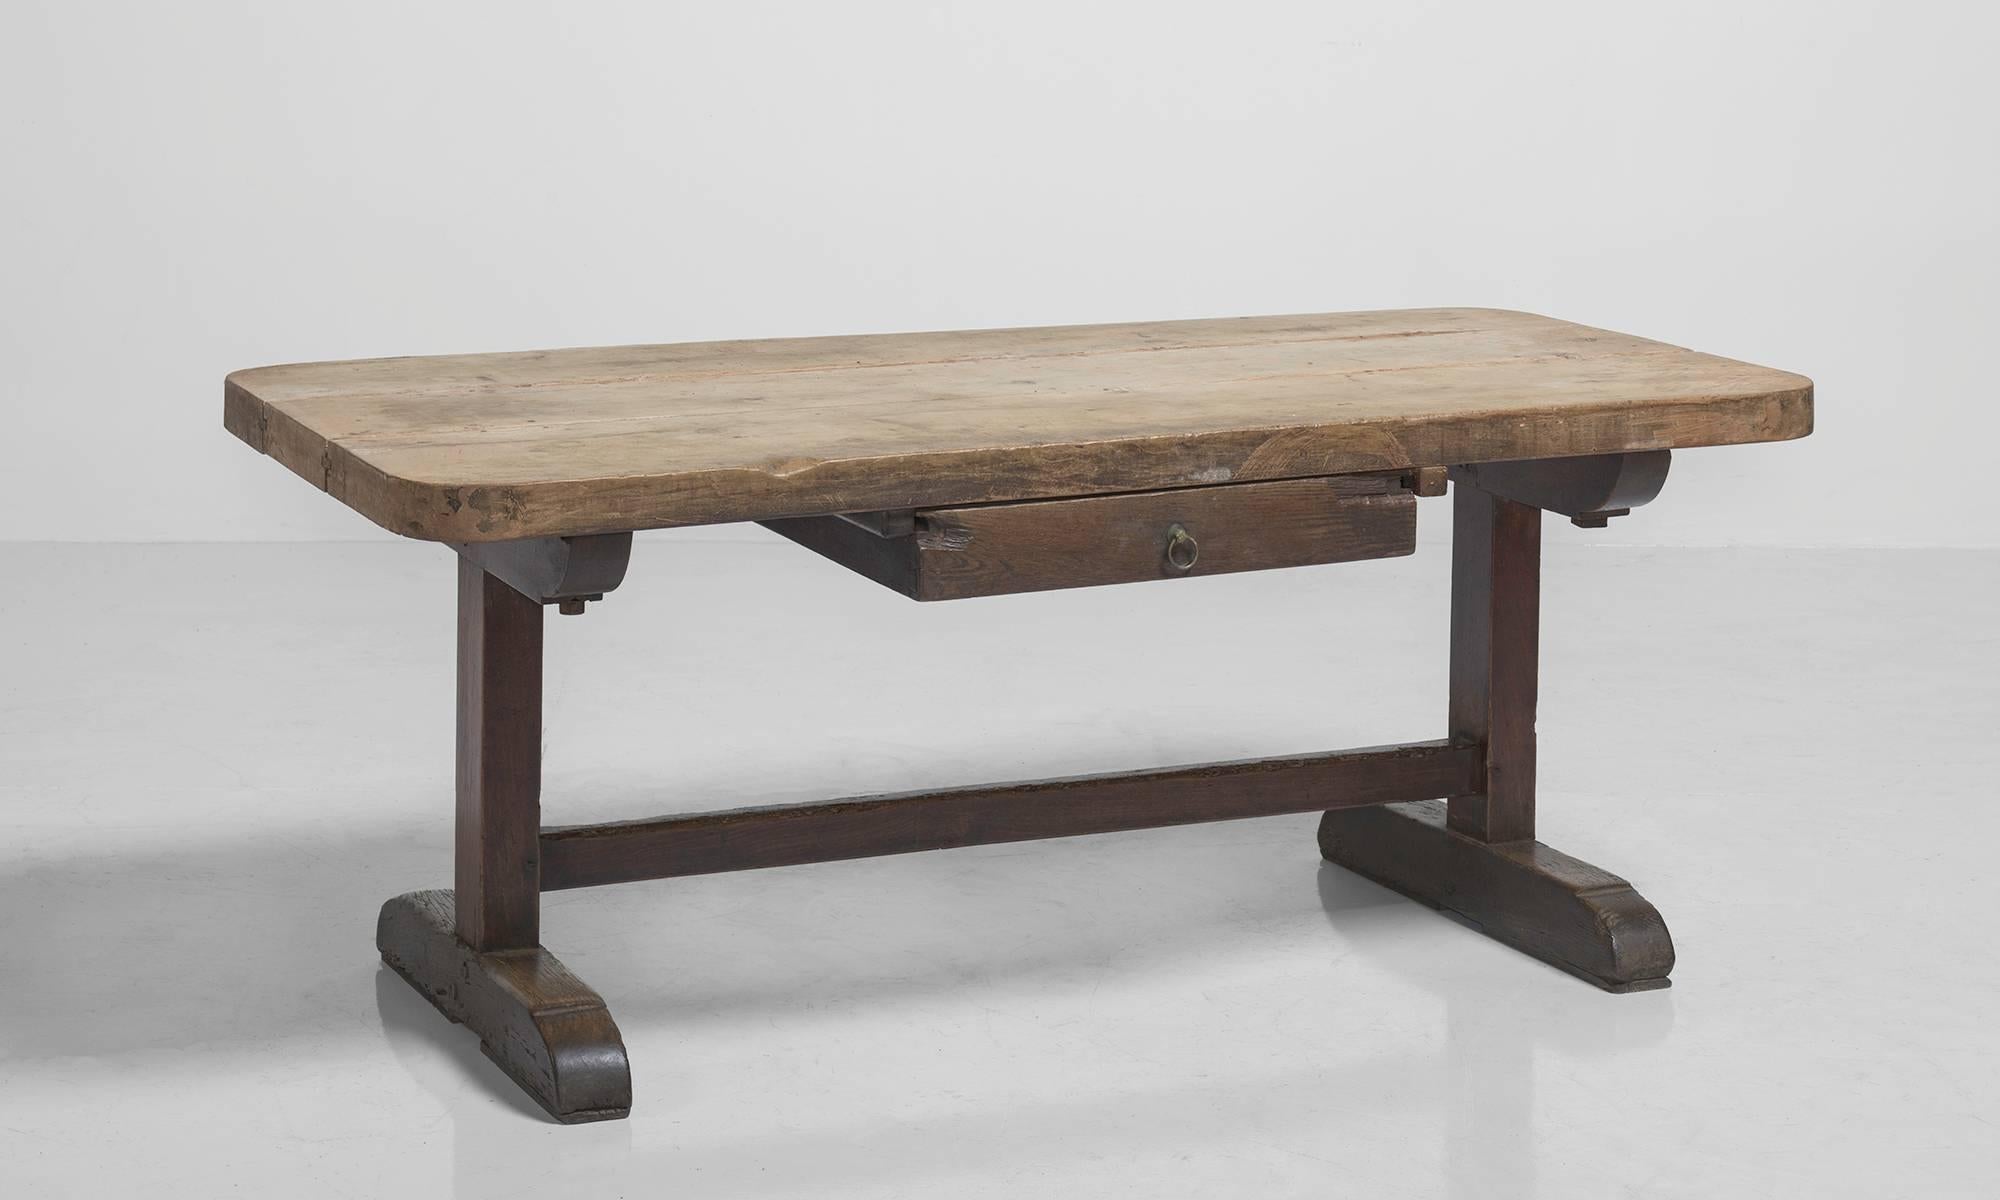 French Primitive Work Table, circa 1860